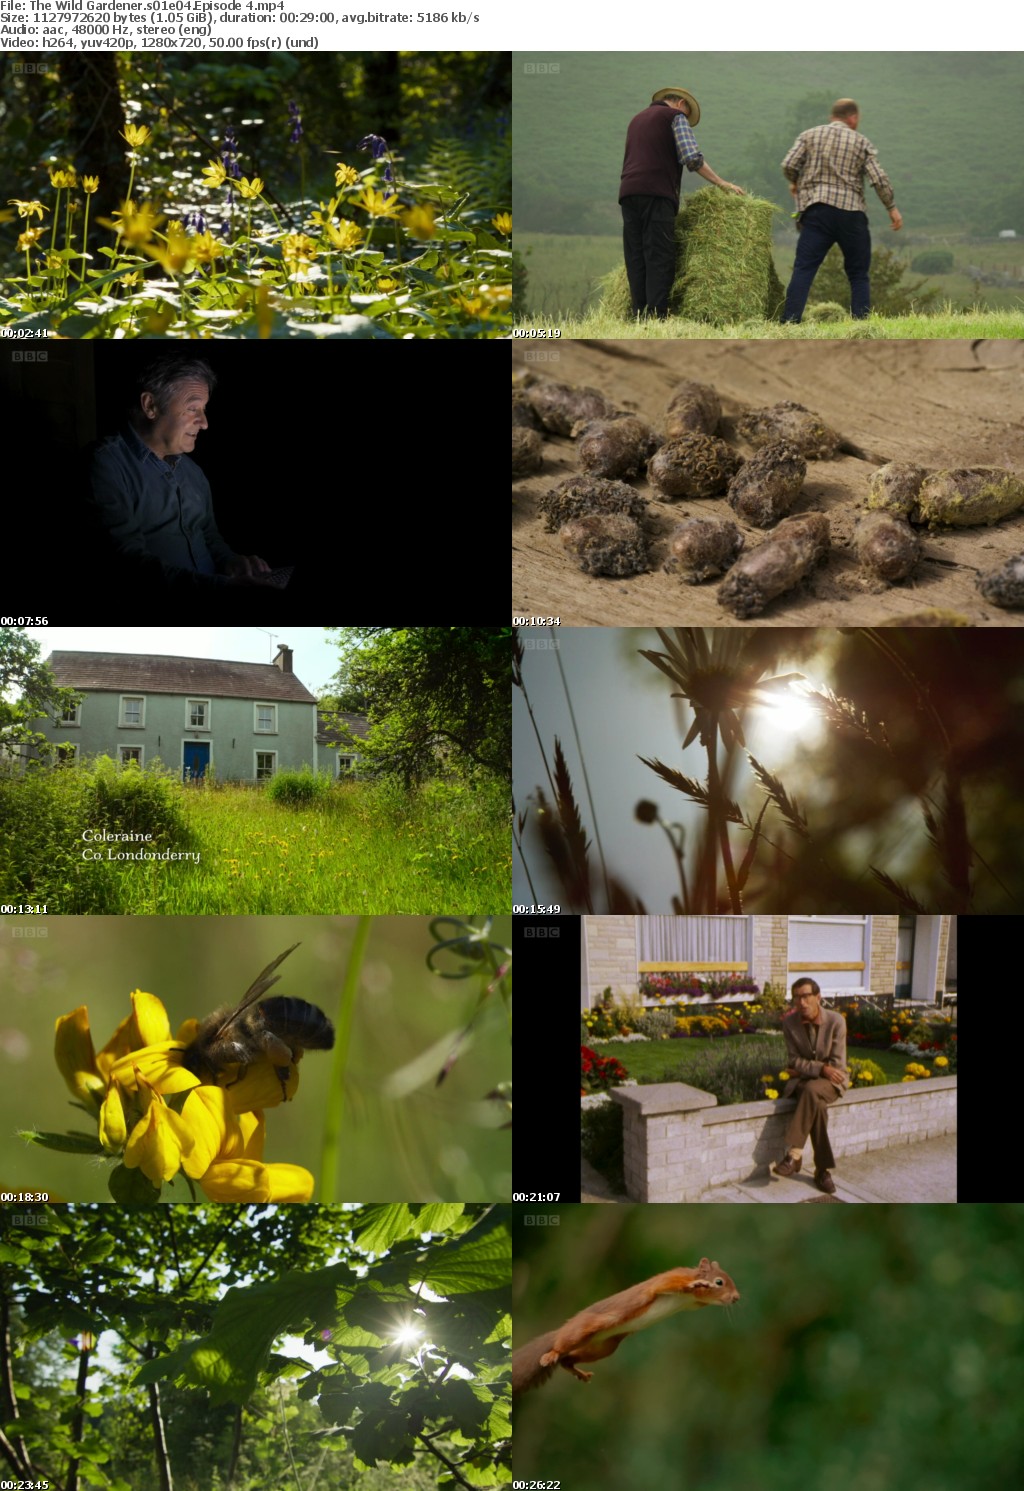 The Wild Gardener S01 complete (1280x720p HD, 50fps, soft Eng subs)